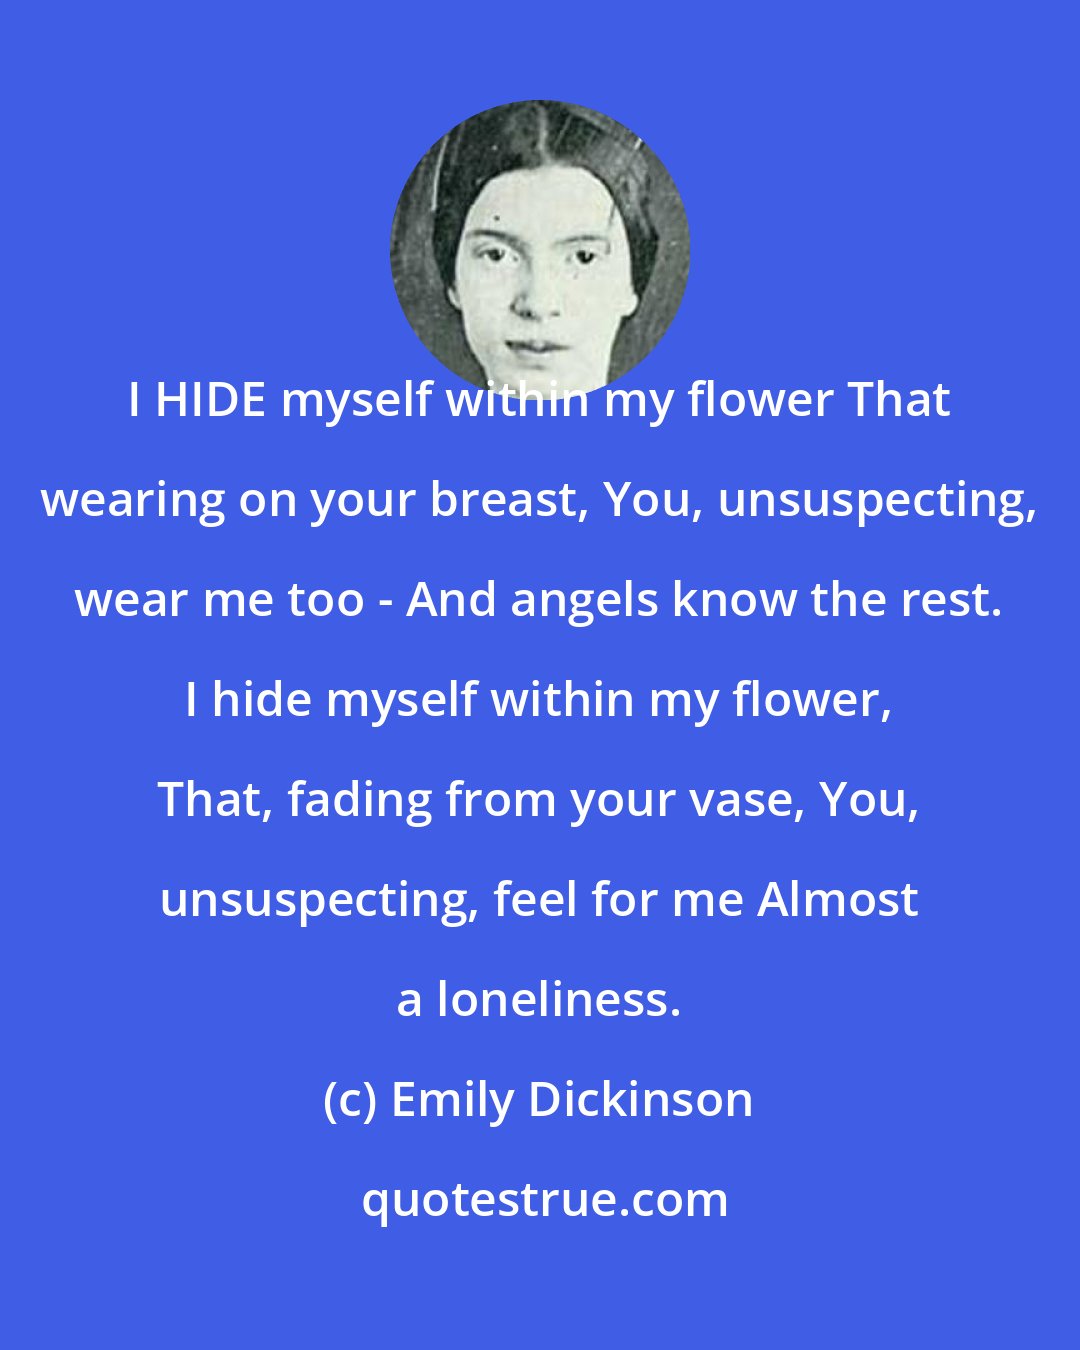 Emily Dickinson: I HIDE myself within my flower That wearing on your breast, You, unsuspecting, wear me too - And angels know the rest. I hide myself within my flower, That, fading from your vase, You, unsuspecting, feel for me Almost a loneliness.